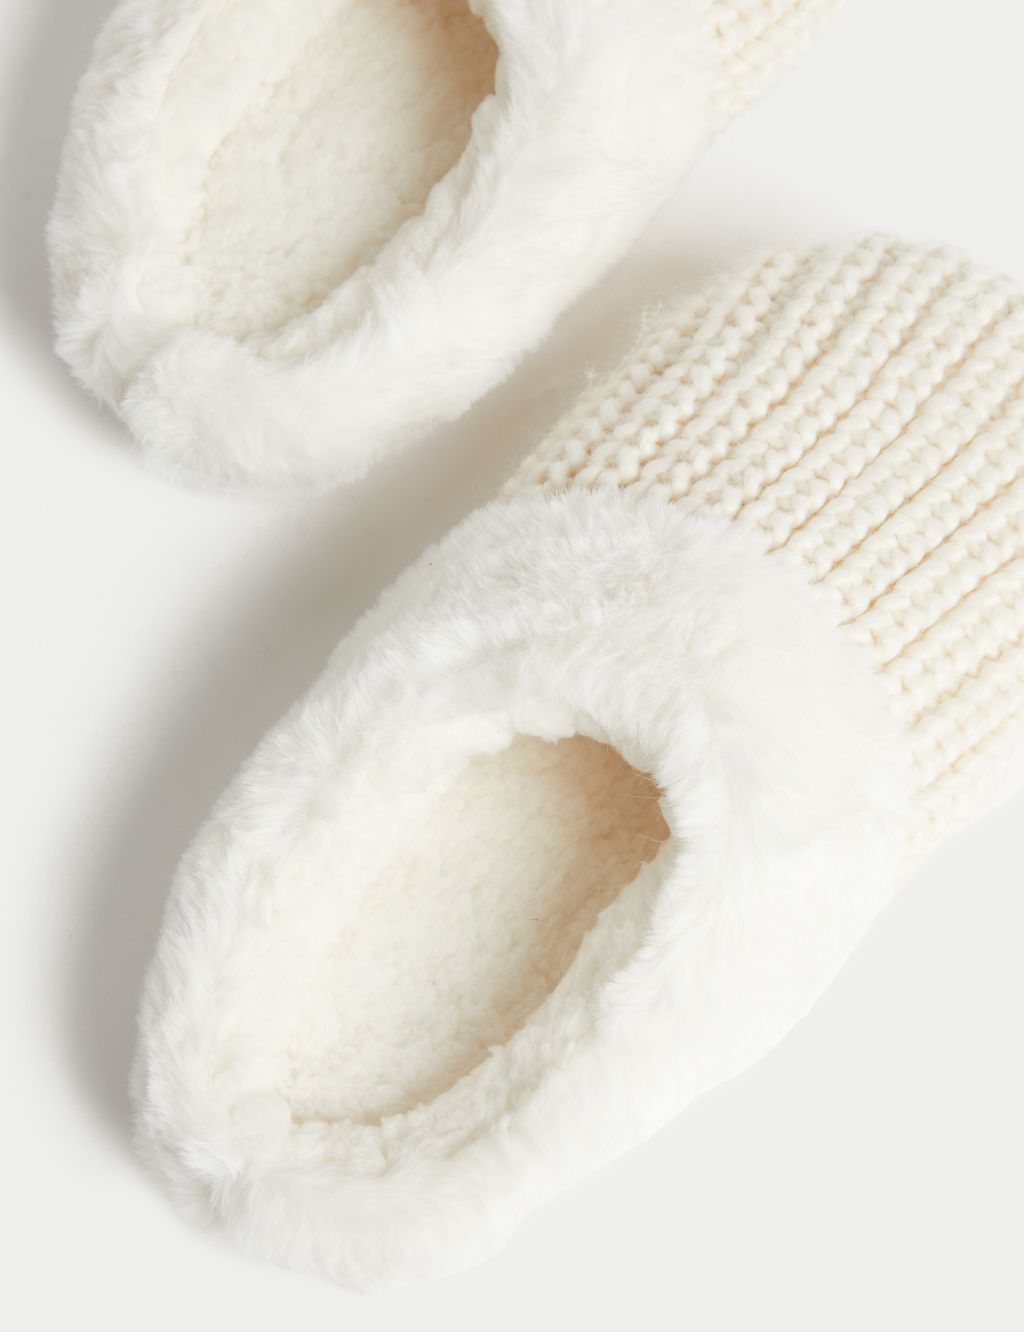 Kids' Knitted Slippers (13 Small - 6 Large) image 3